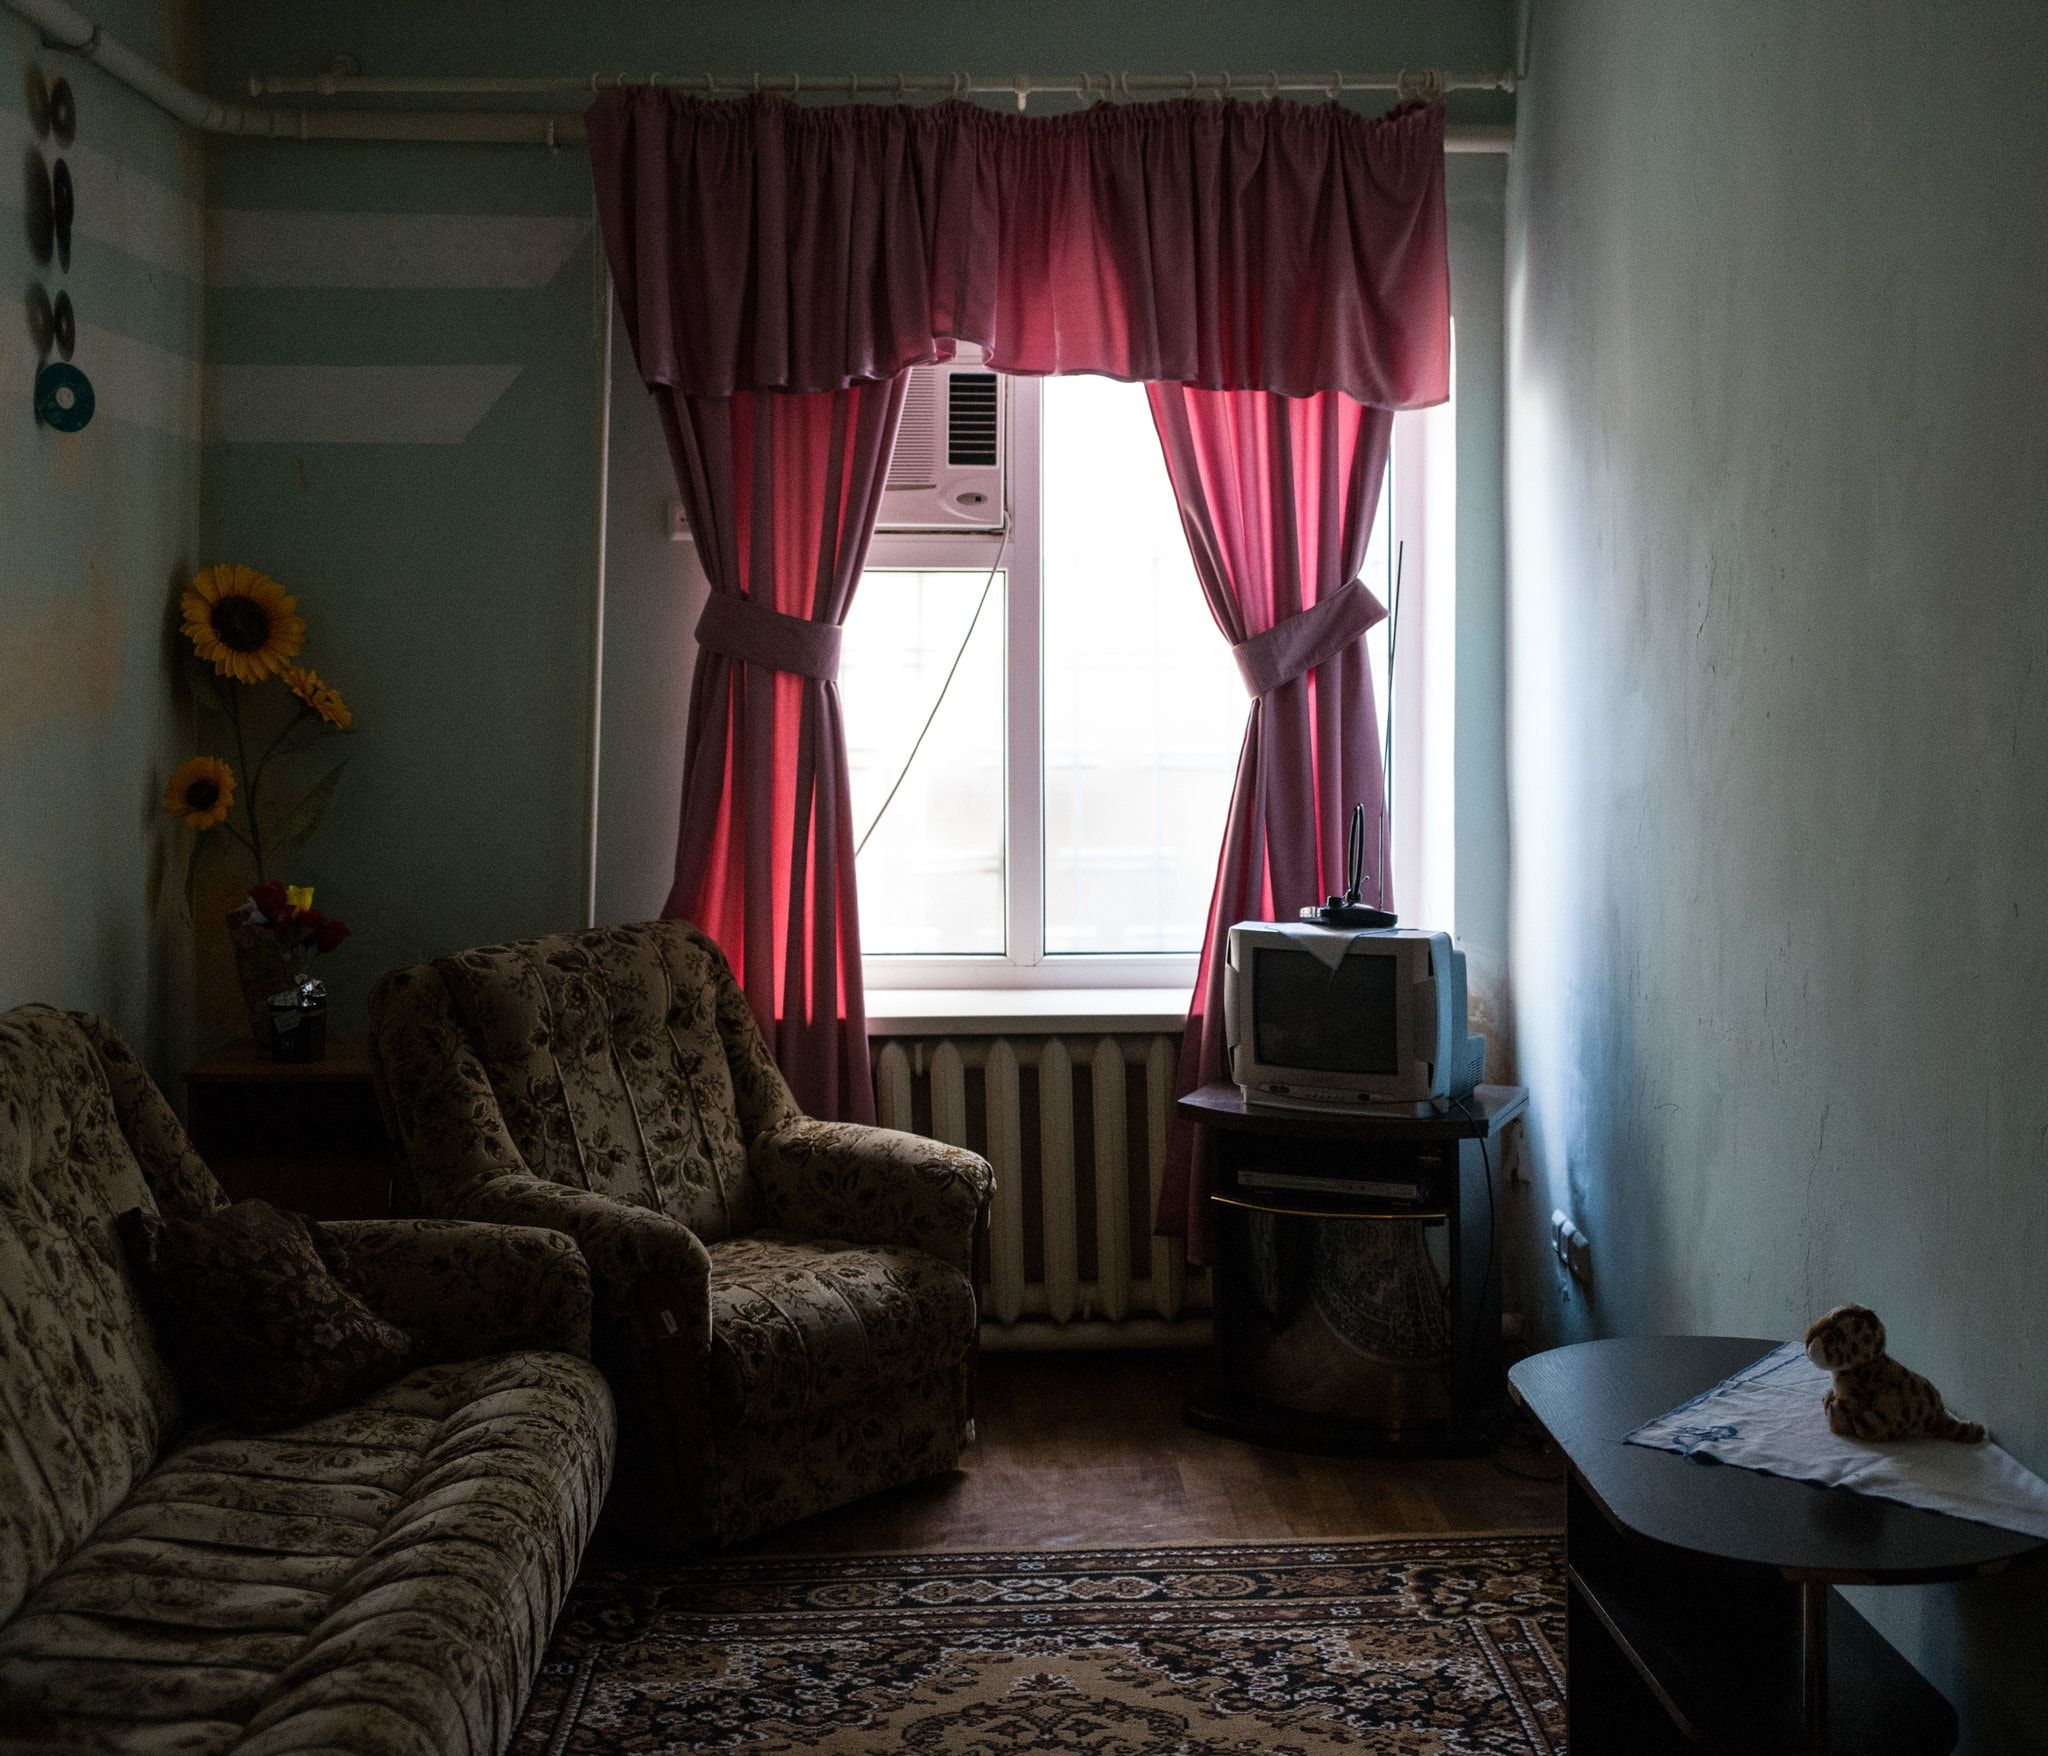 A room for conjugal visits at the women’s prison in Odessa. Image by Misha Friedman. Ukraine, undated.